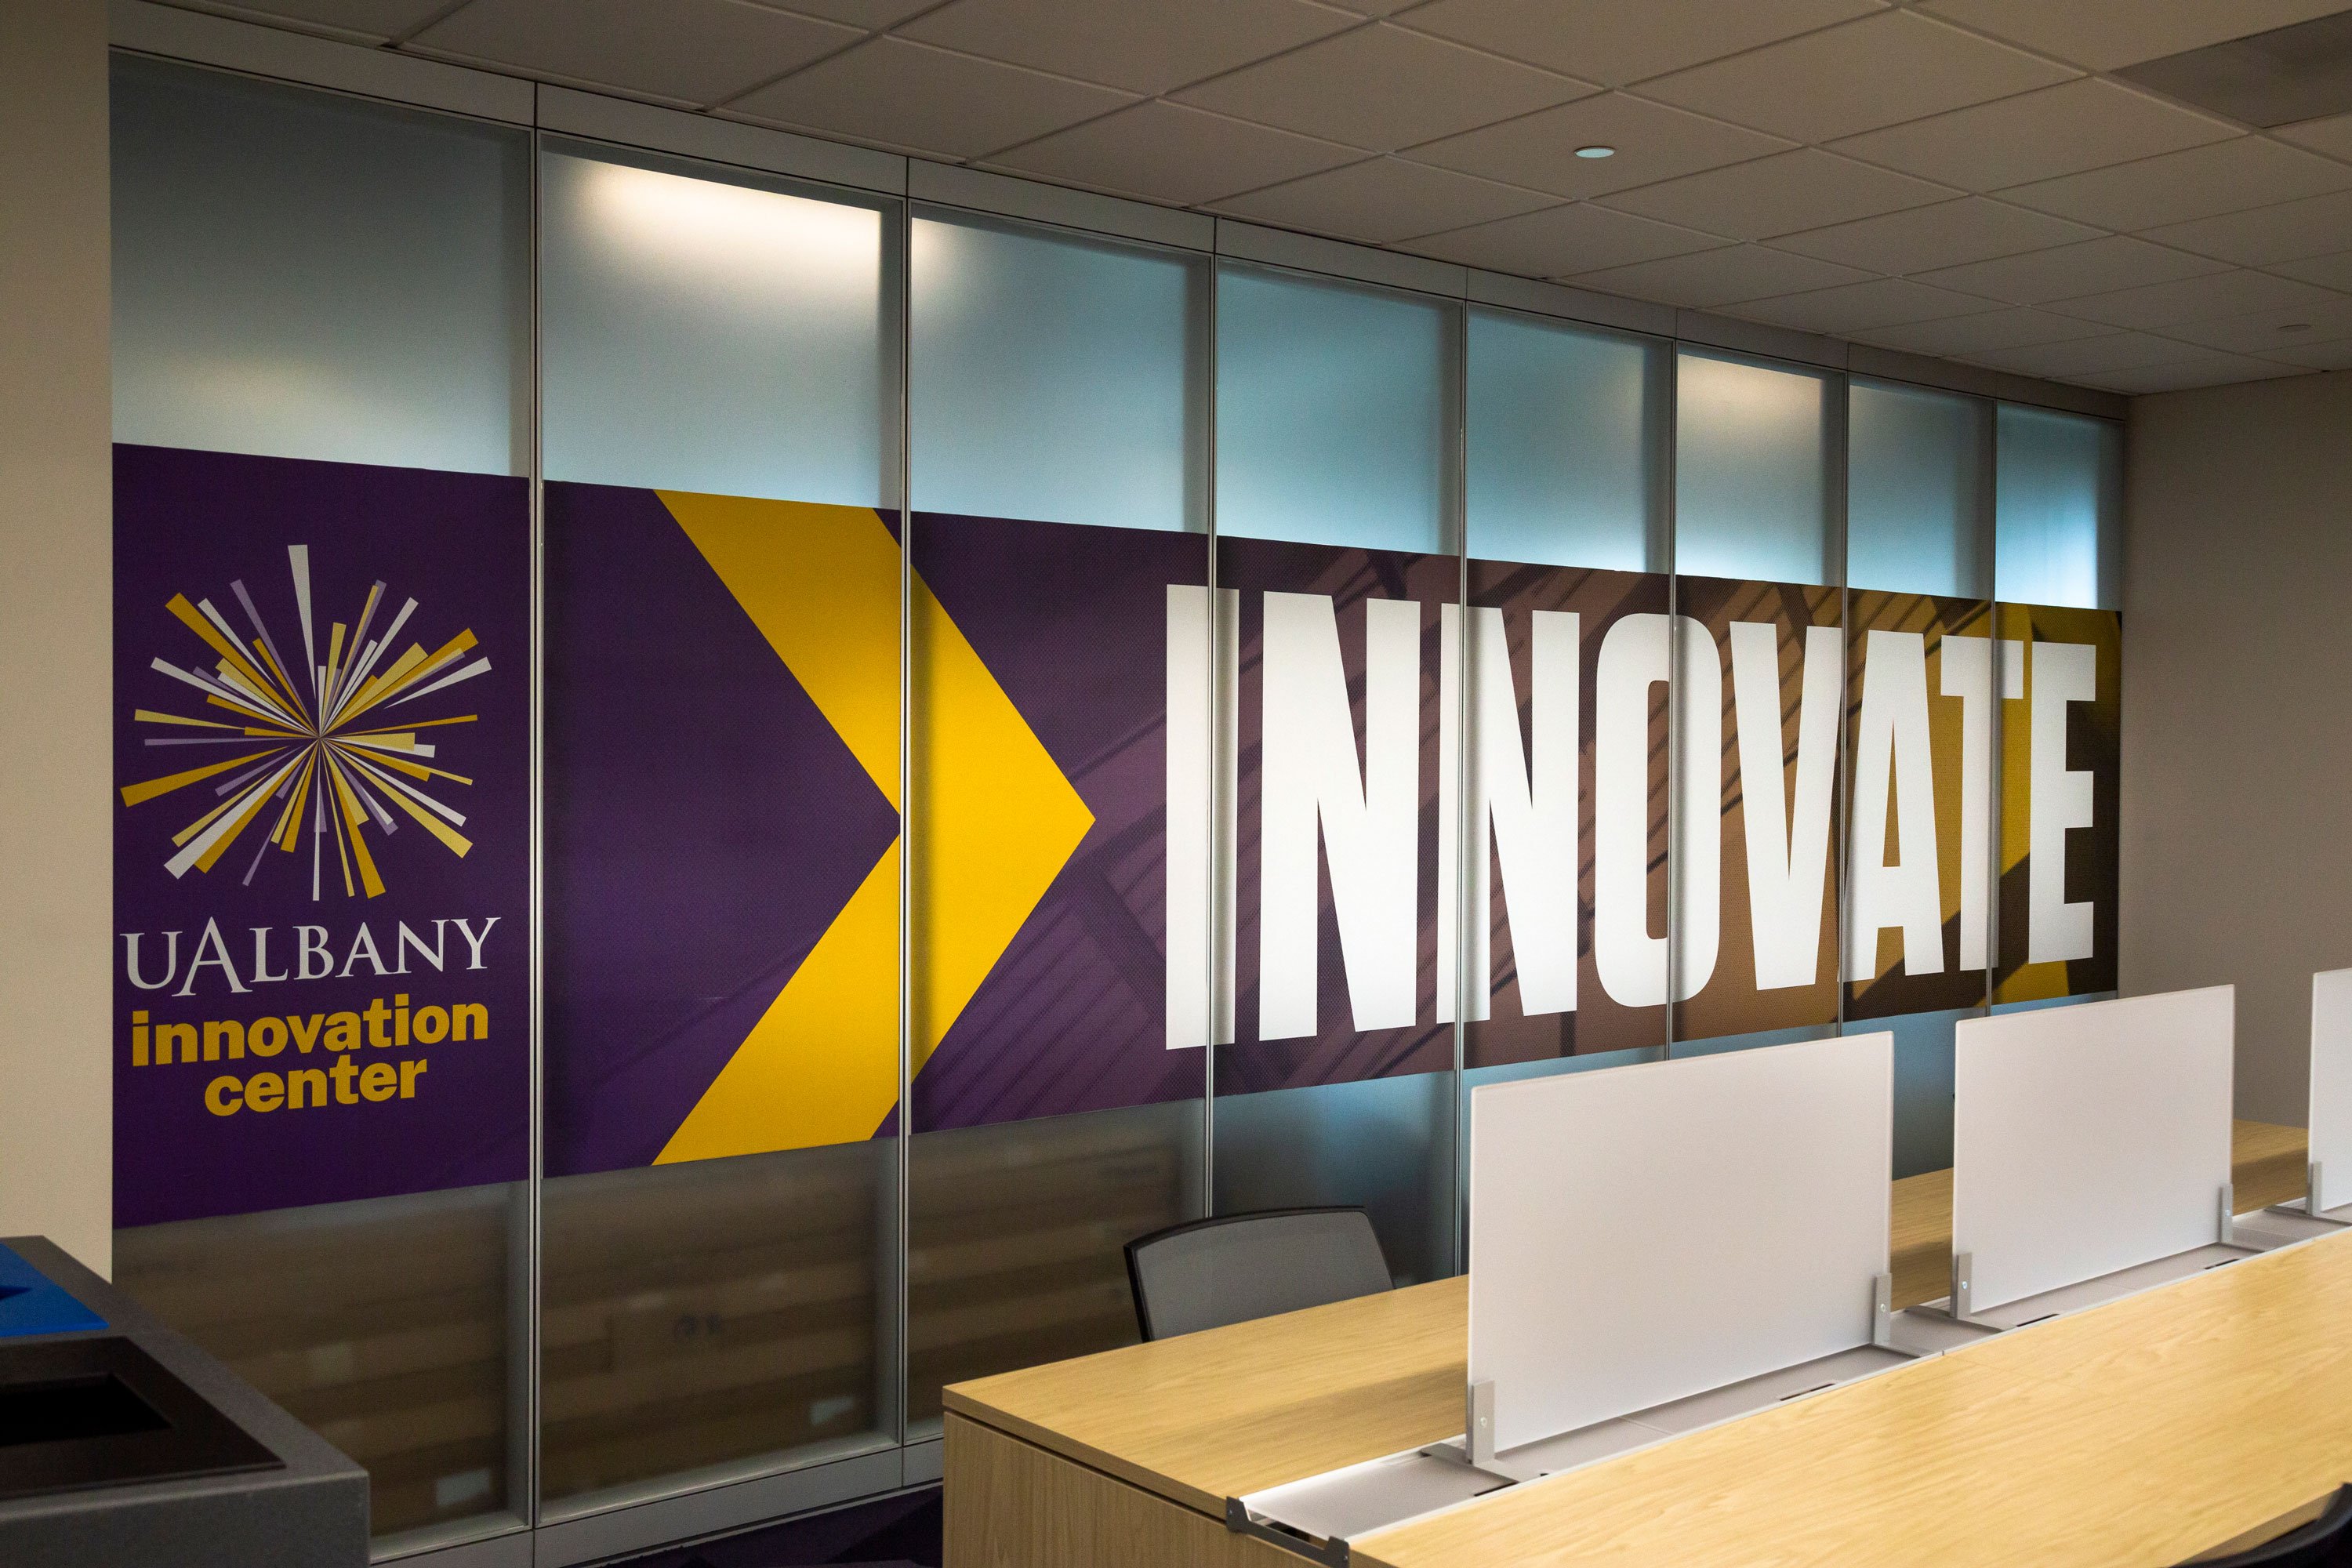 A sign inside the UAlbany Innovation Center shows the center's name and starburst logo, with the word Innovate.